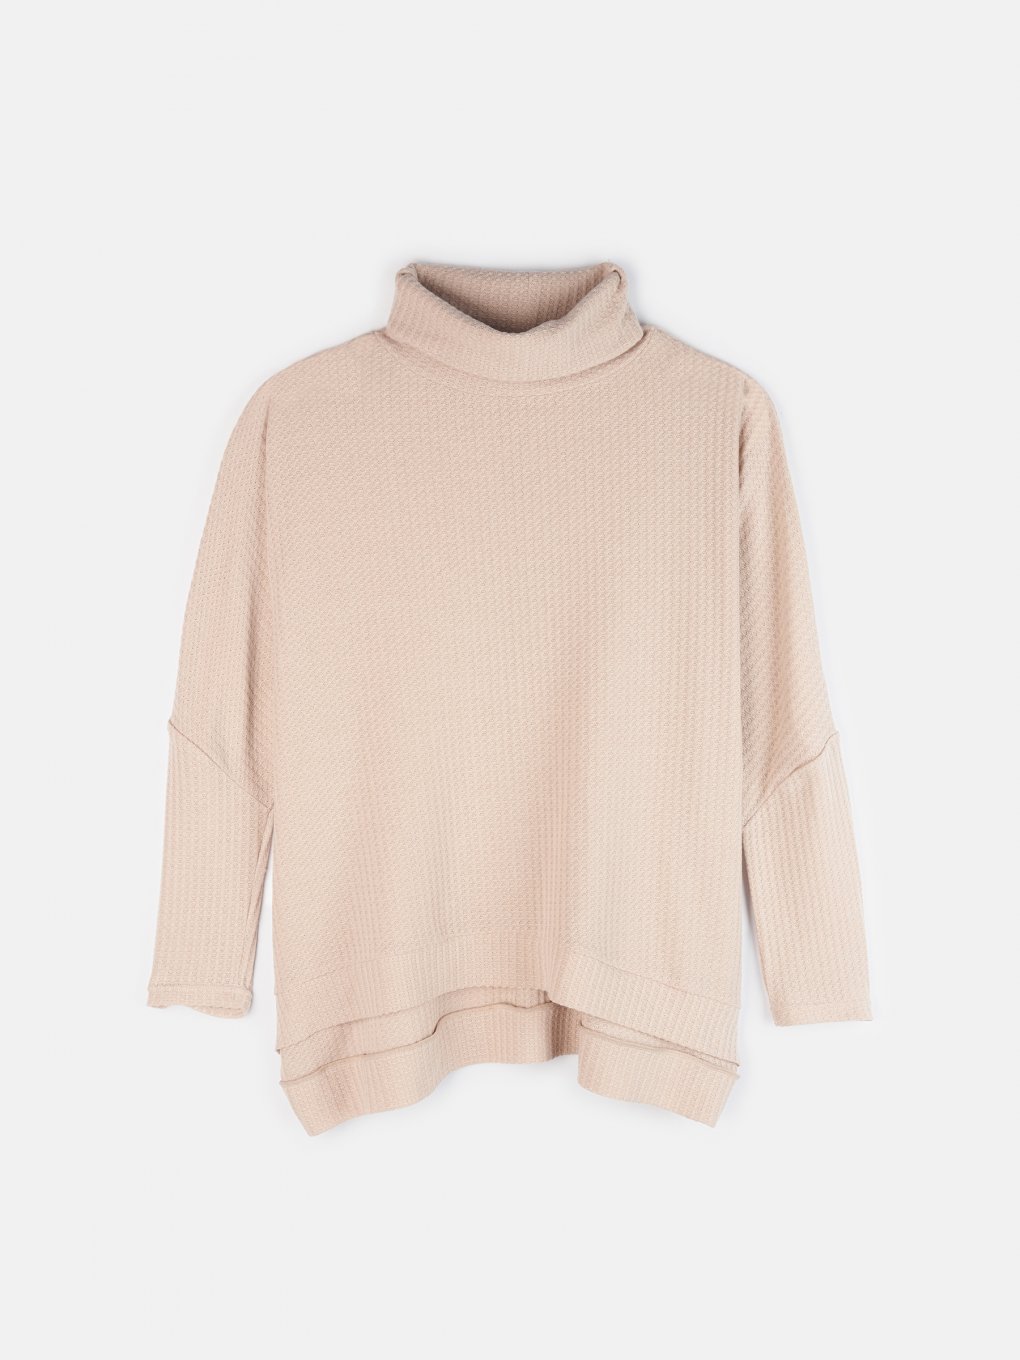 Structured oversized roll neck top